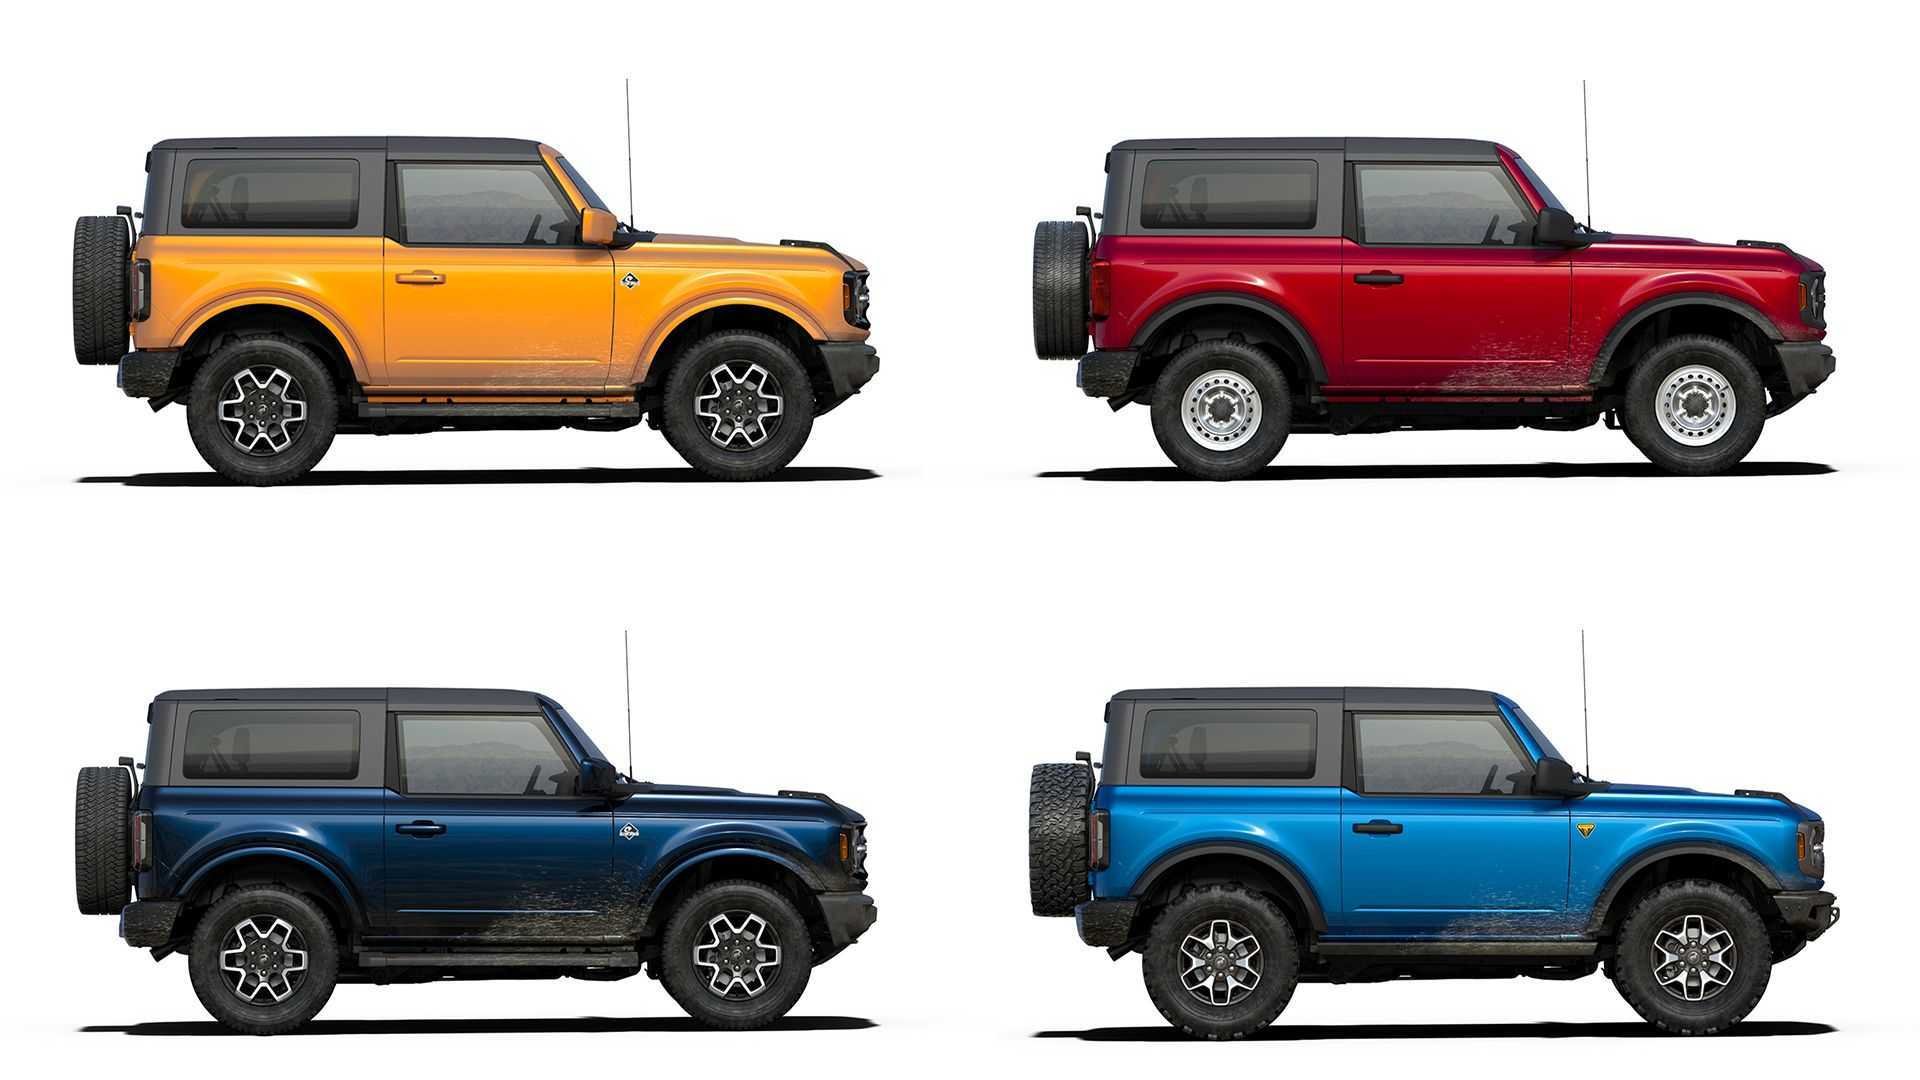 2021 Ford Bronco Configurator Is Live, Most Expensive Costs $63,995